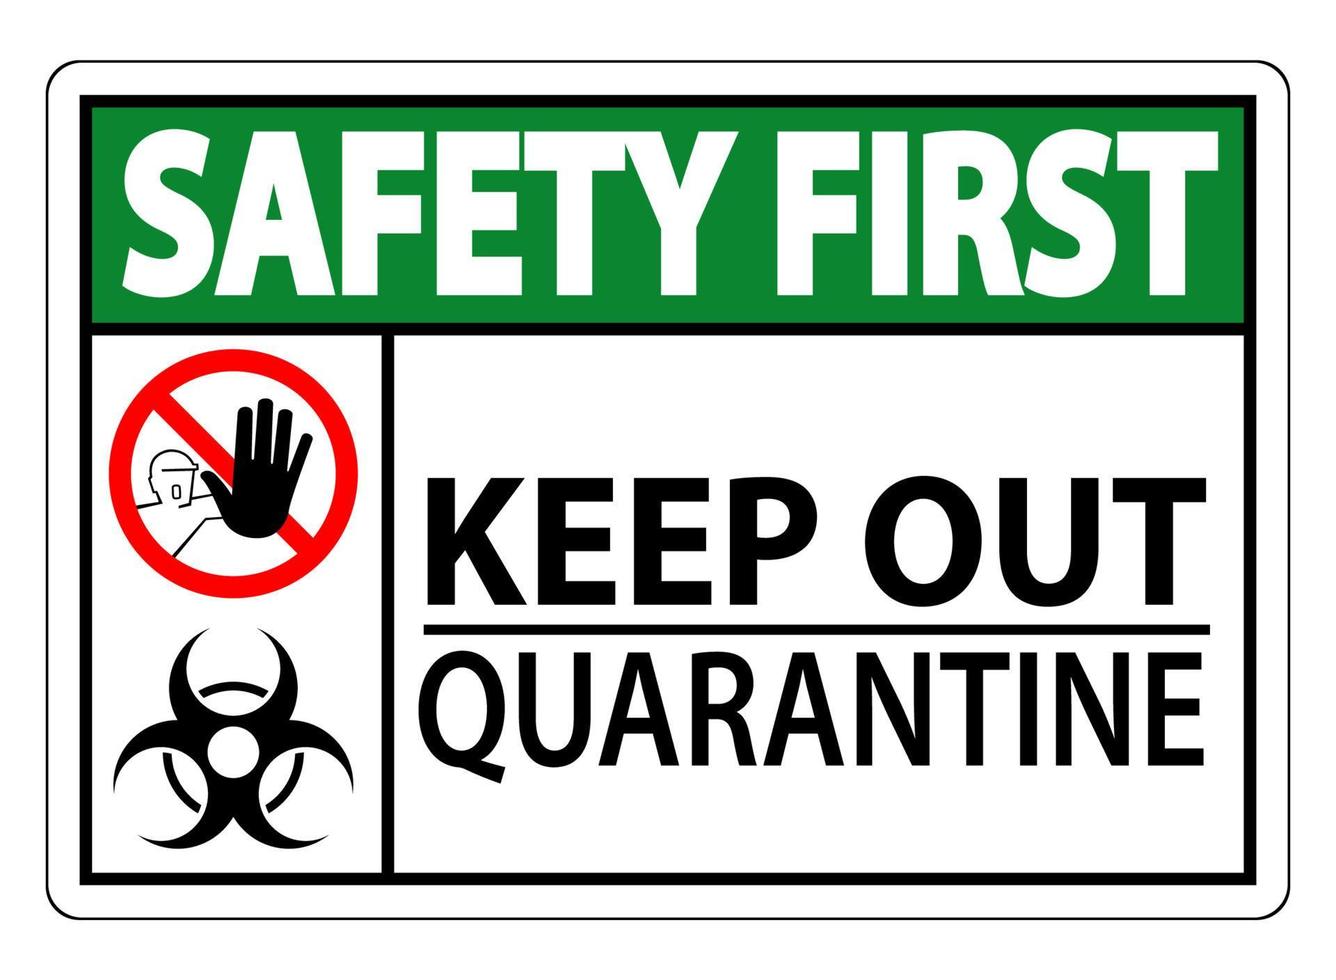 Safety First Keep Out Quarantine Sign Isolated On White Background,Vector Illustration EPS.10 vector